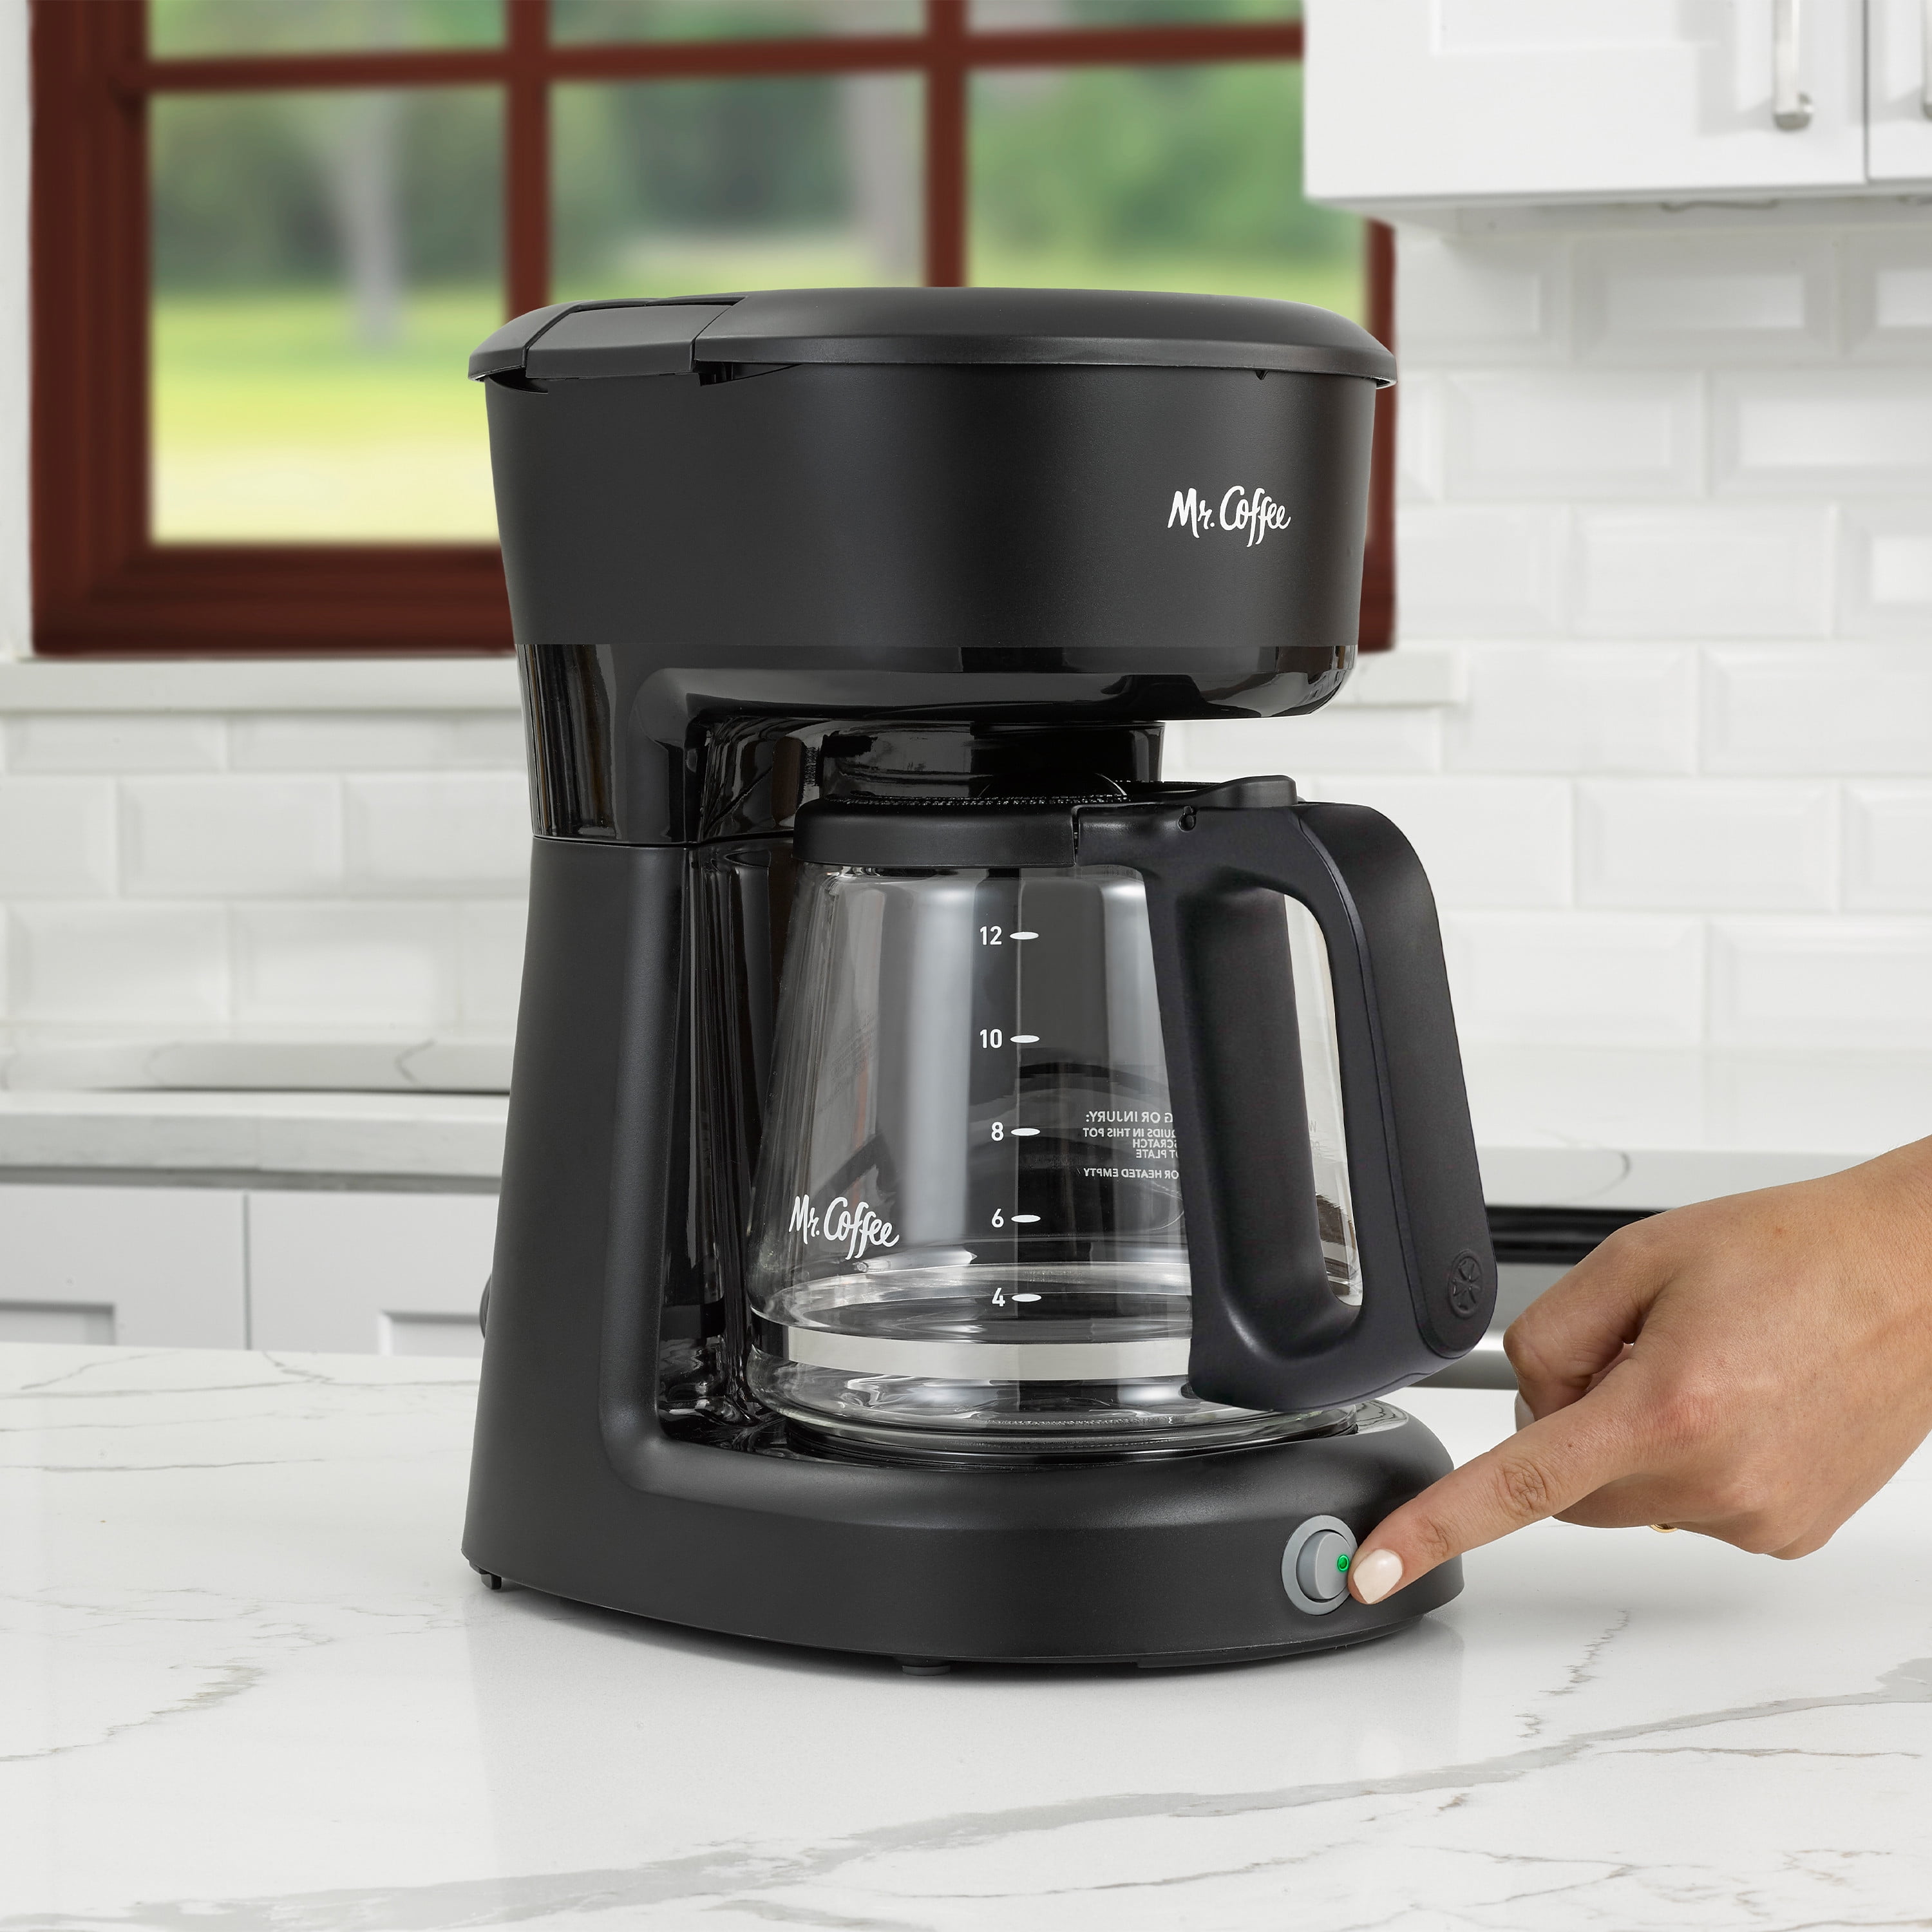 Mr. Coffee Coffee Maker, Switch, 12 Cup